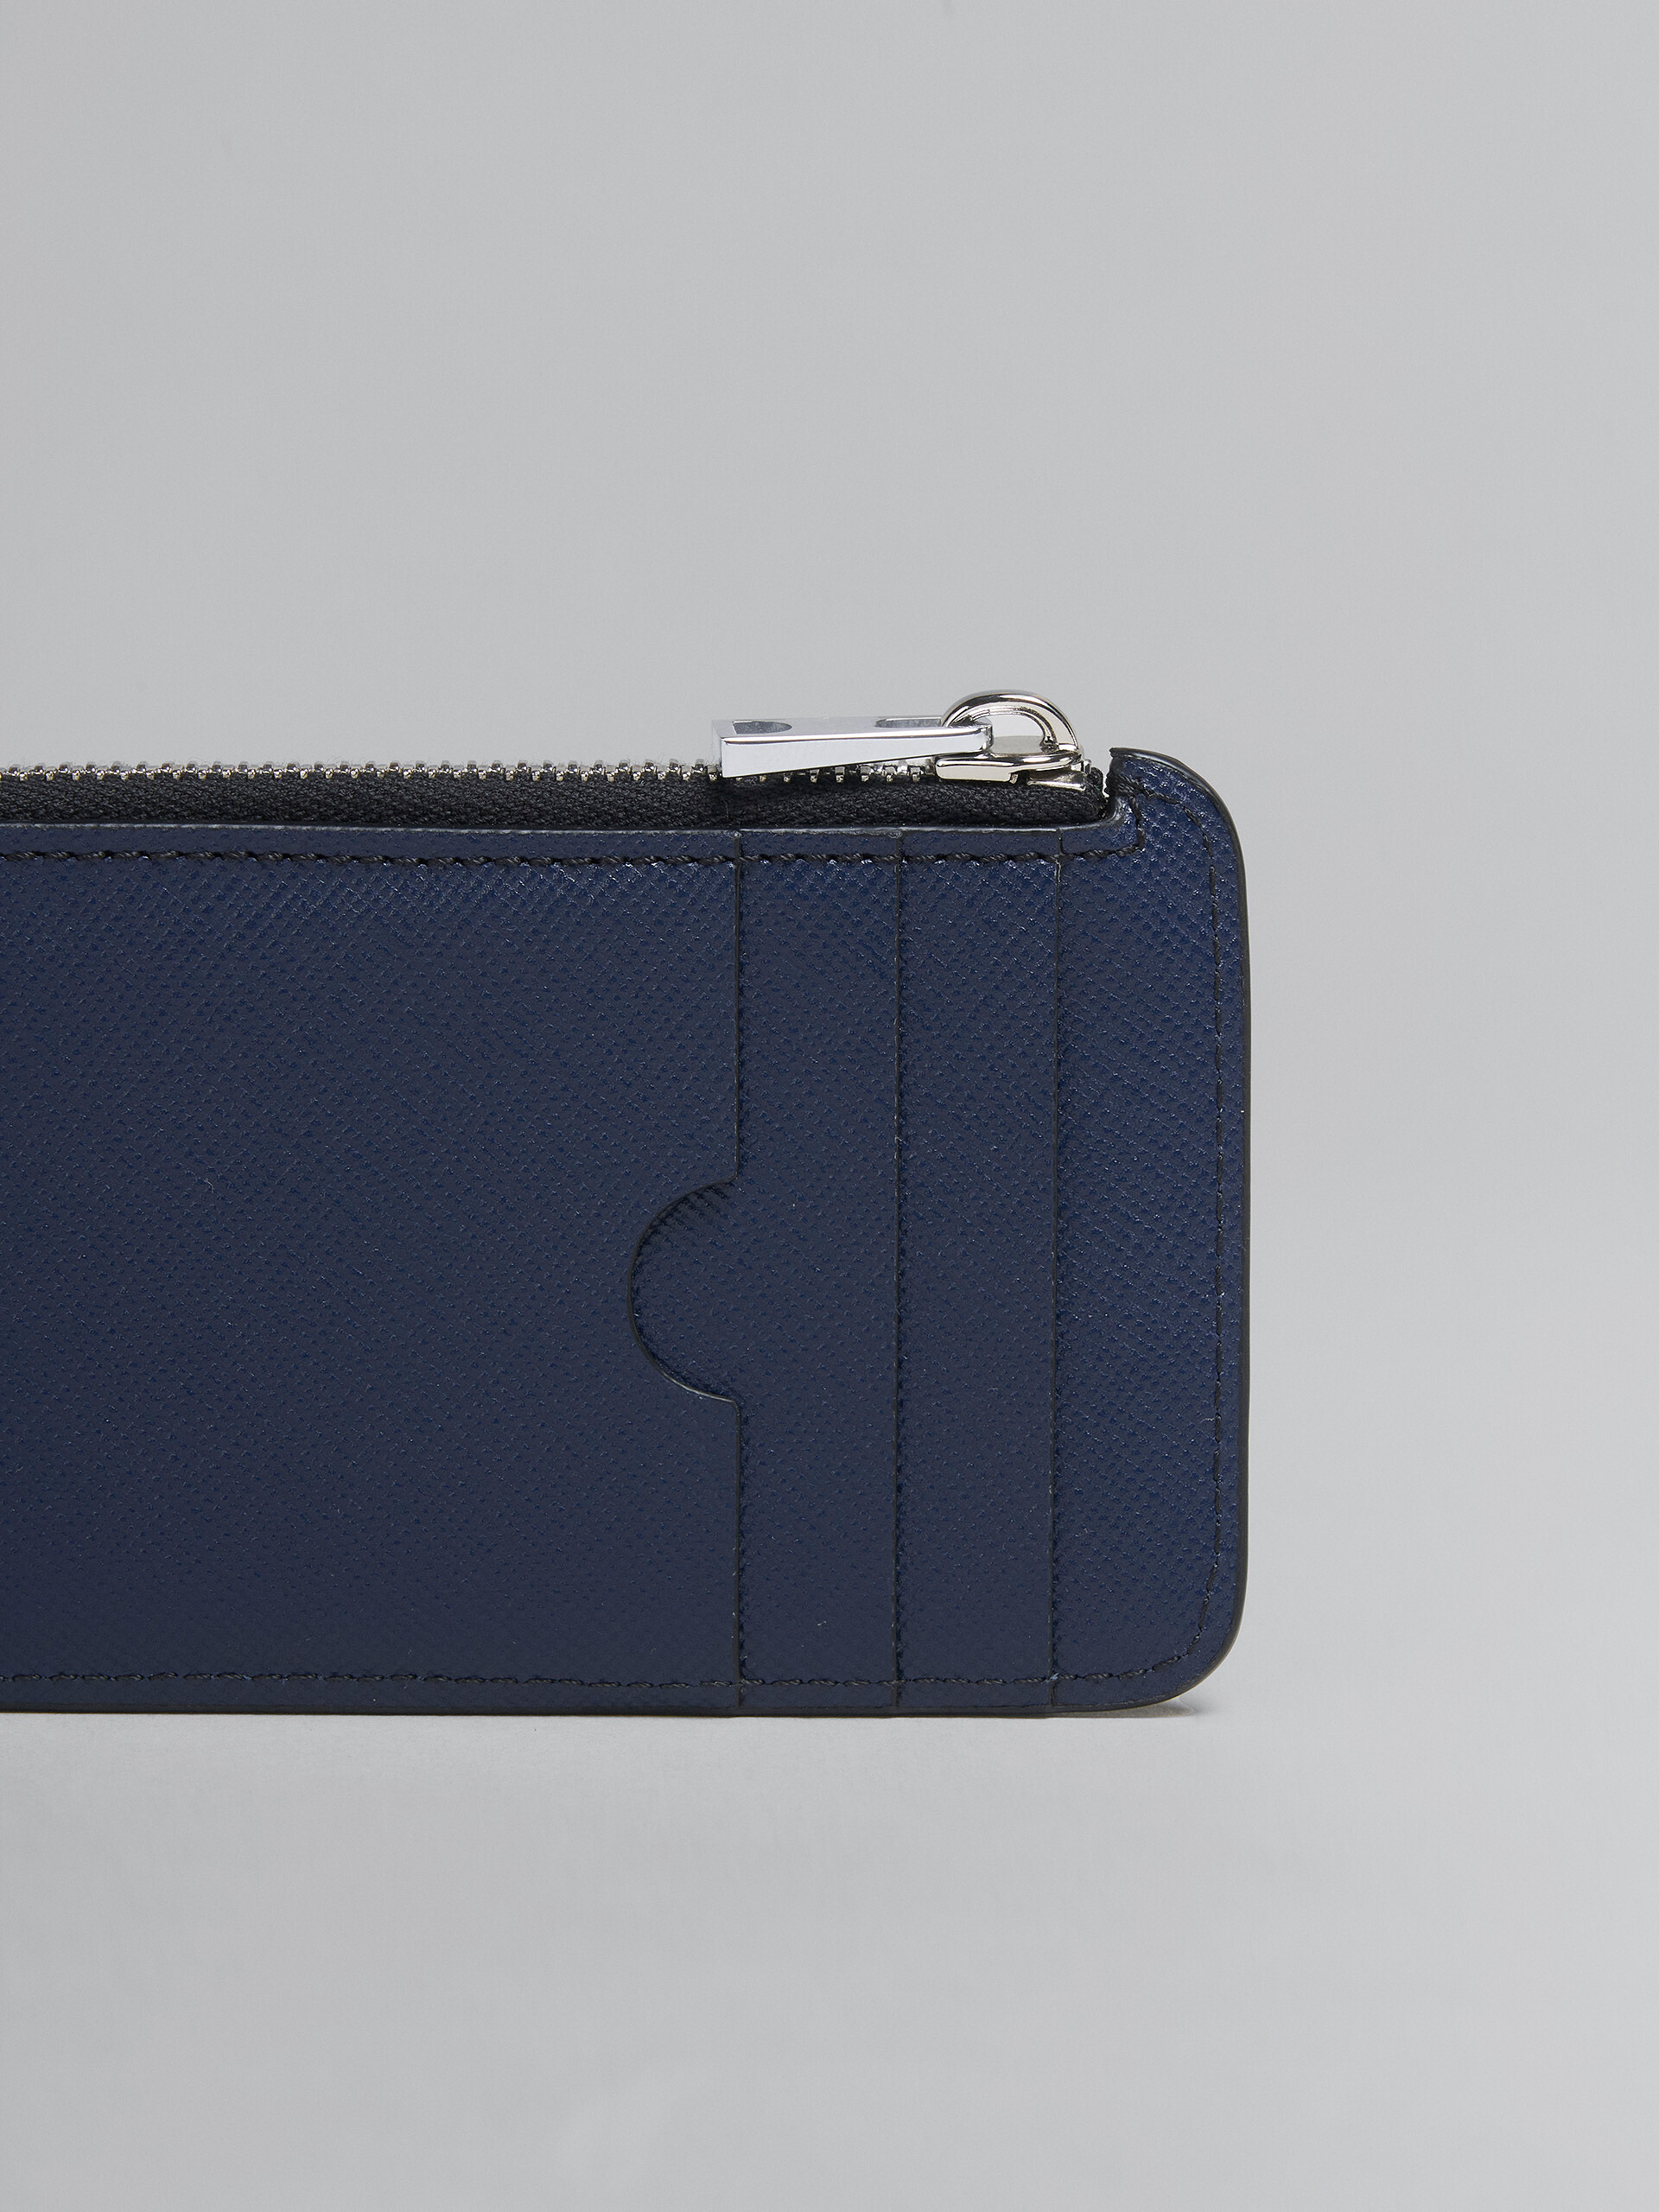 Grey and blue saffiano leather zip-around card case